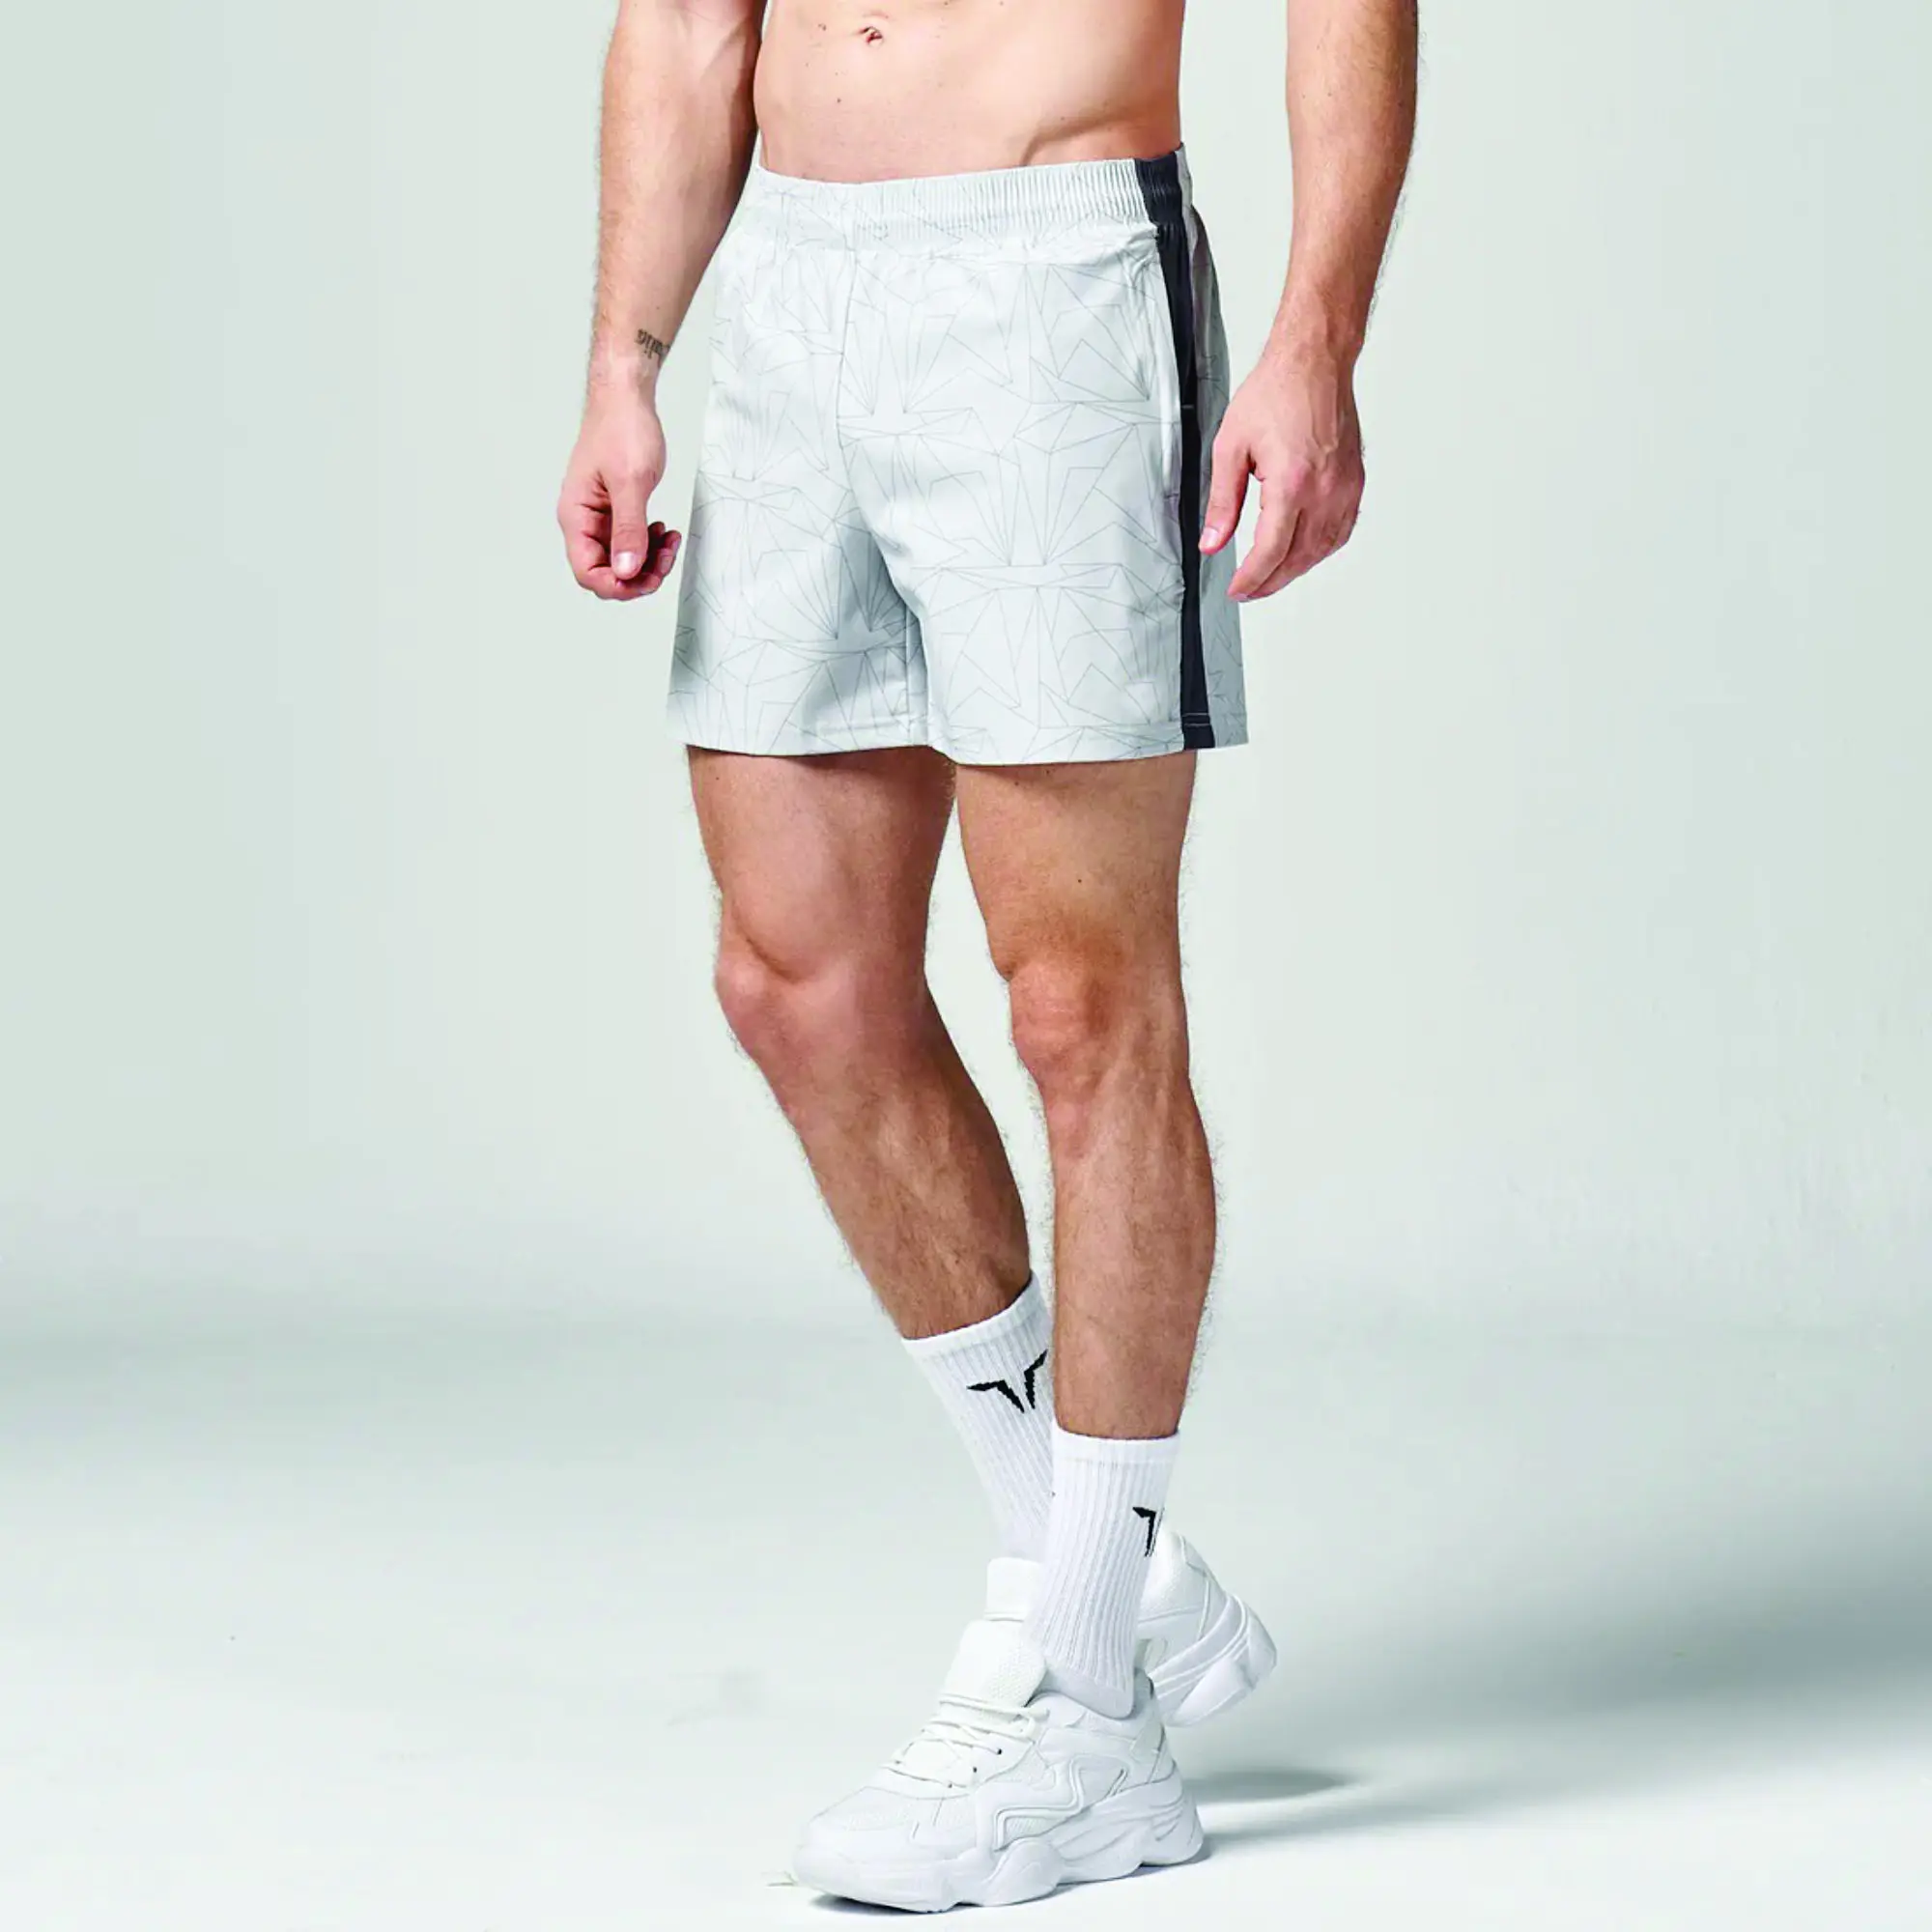 High Stretch Woven Fabric Northern Droplet Print Lab 360 5 Inch Superstretch Shorts with Side Ventilation Panels and Zip Pockets